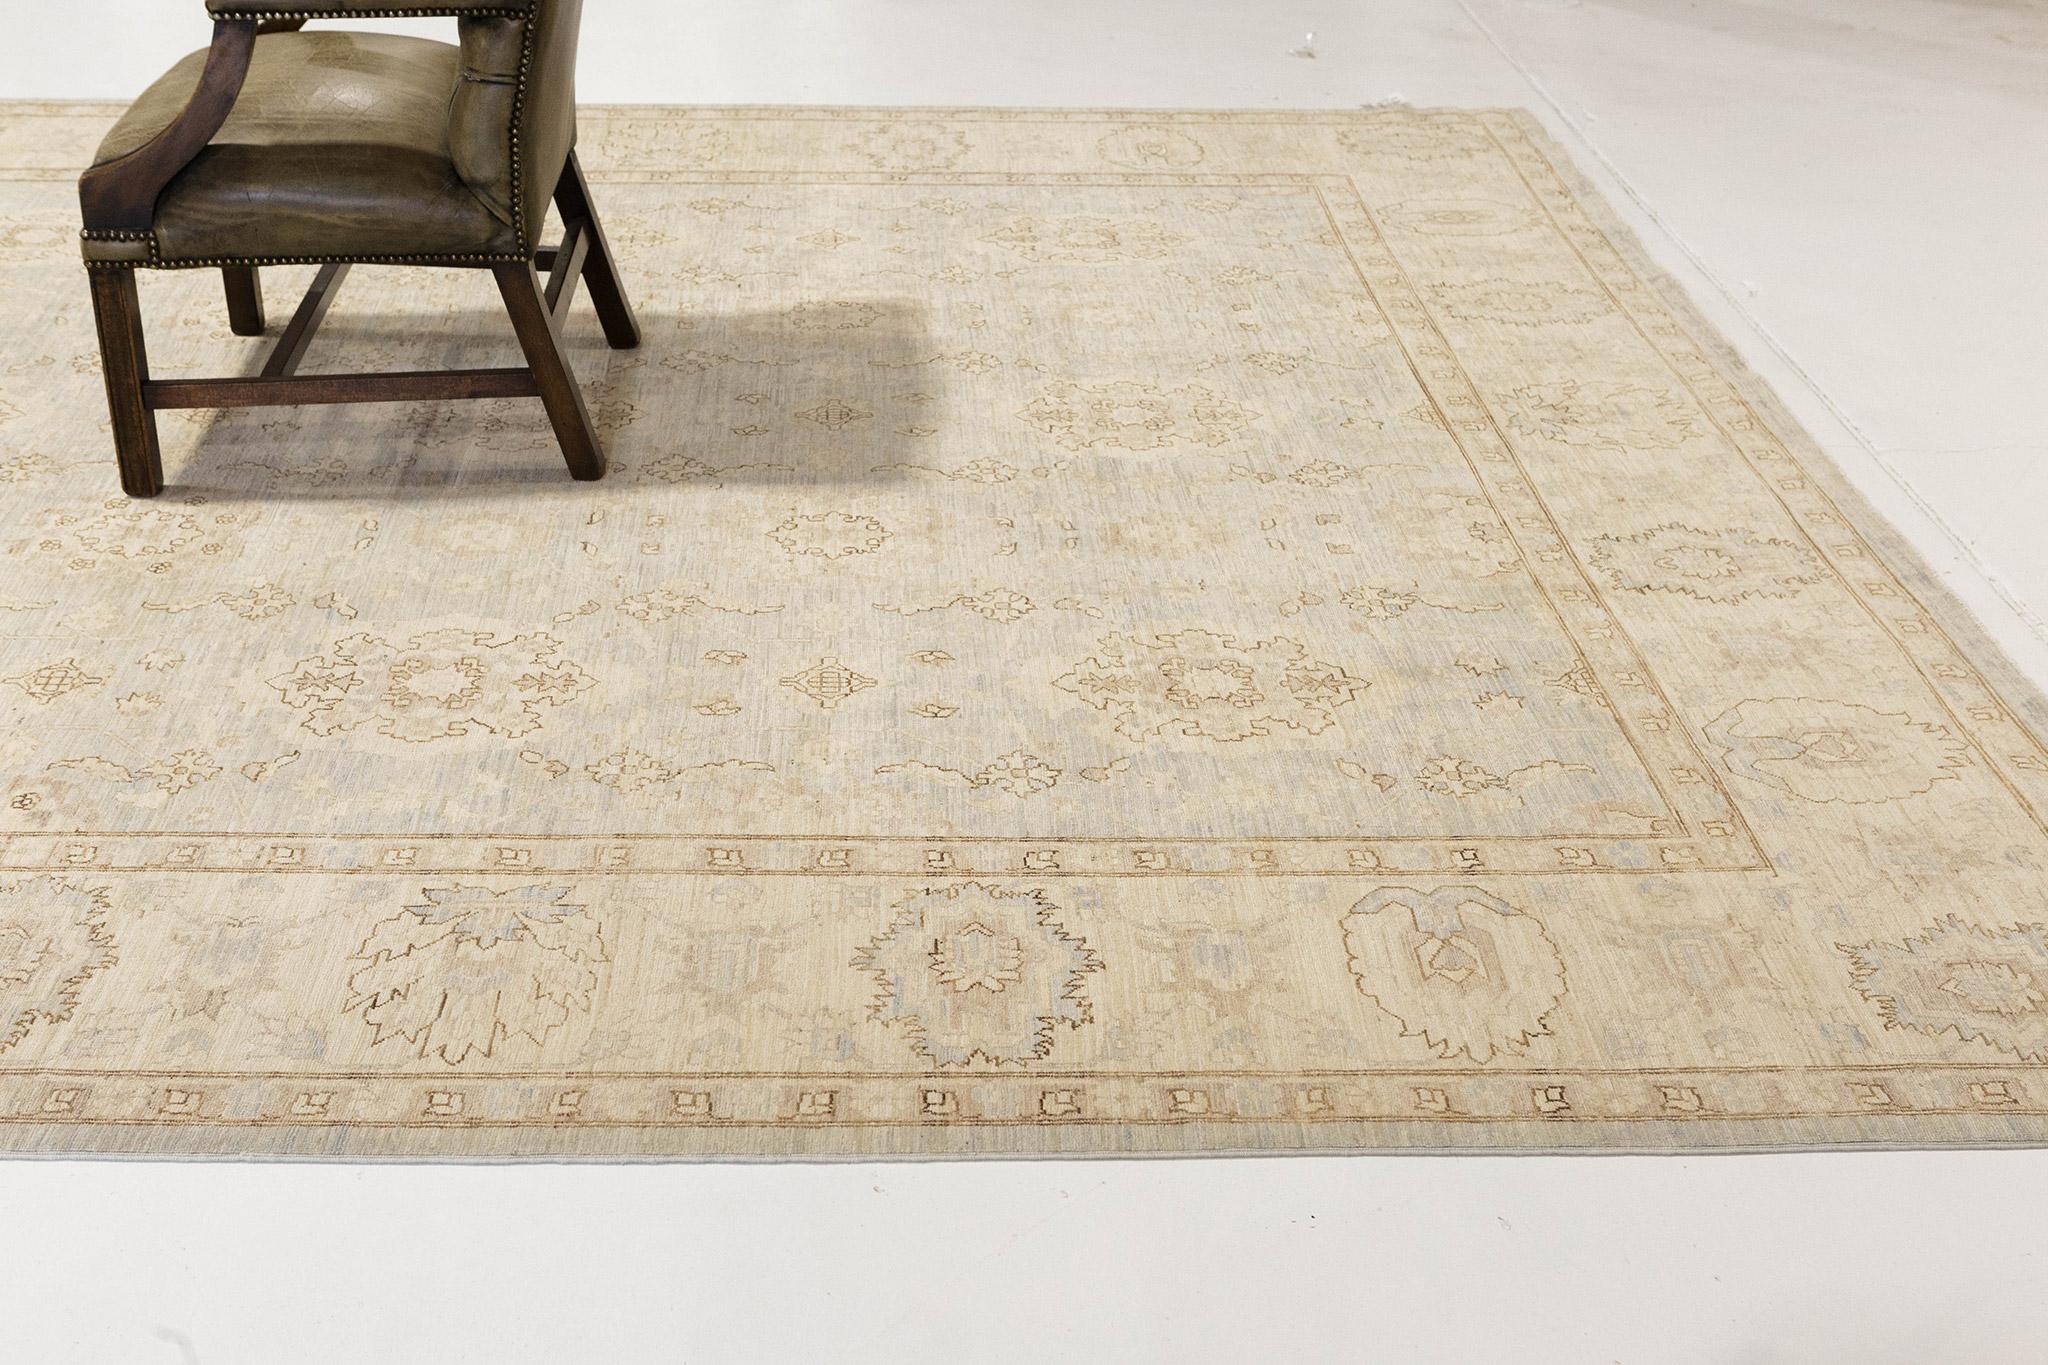 This breath-taking raptured revival of the Sultanabad rug features the soft palette of earth tones made from a vegetable dye that captivates every designer's creativity. A withered design highlights the details of each element throughout this work